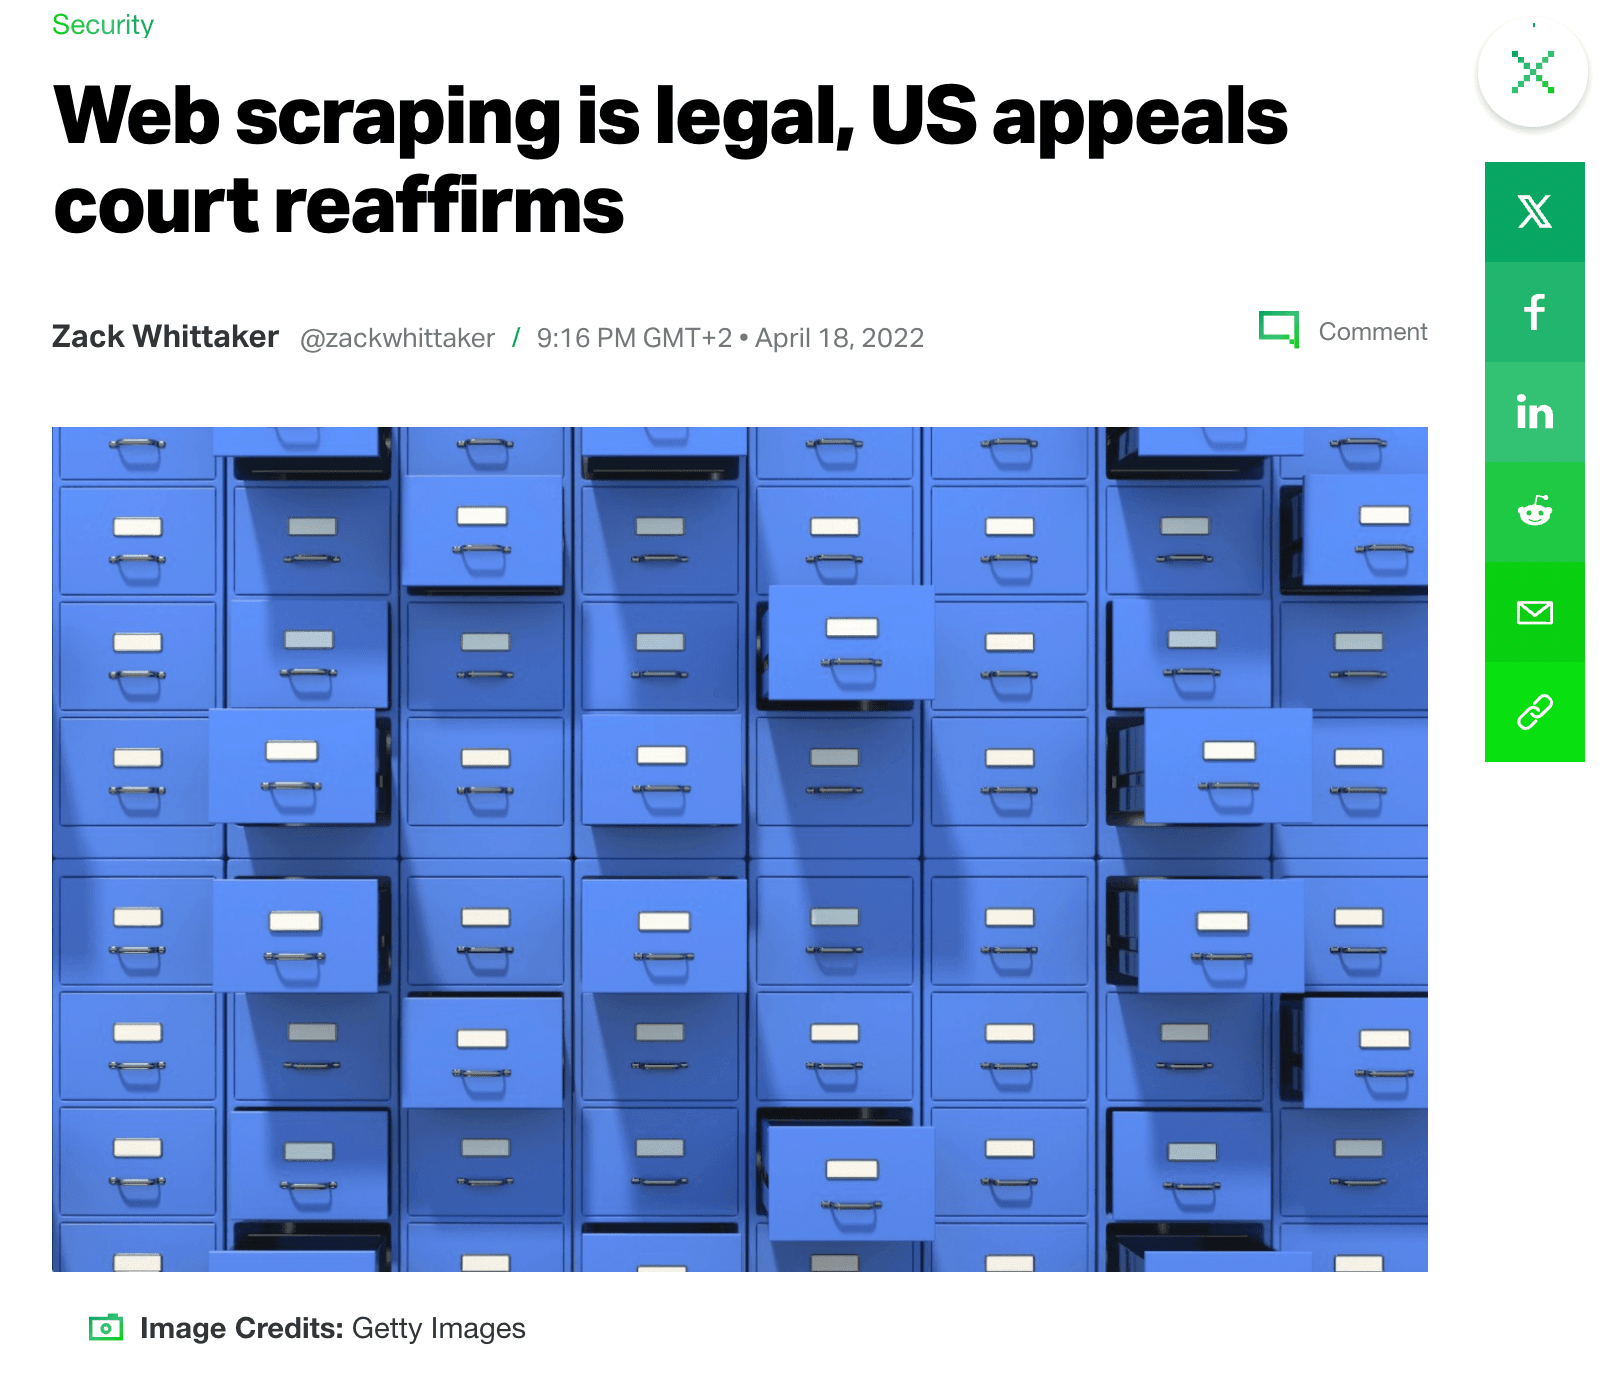 webscraping is legal techcrunch article - image4.png